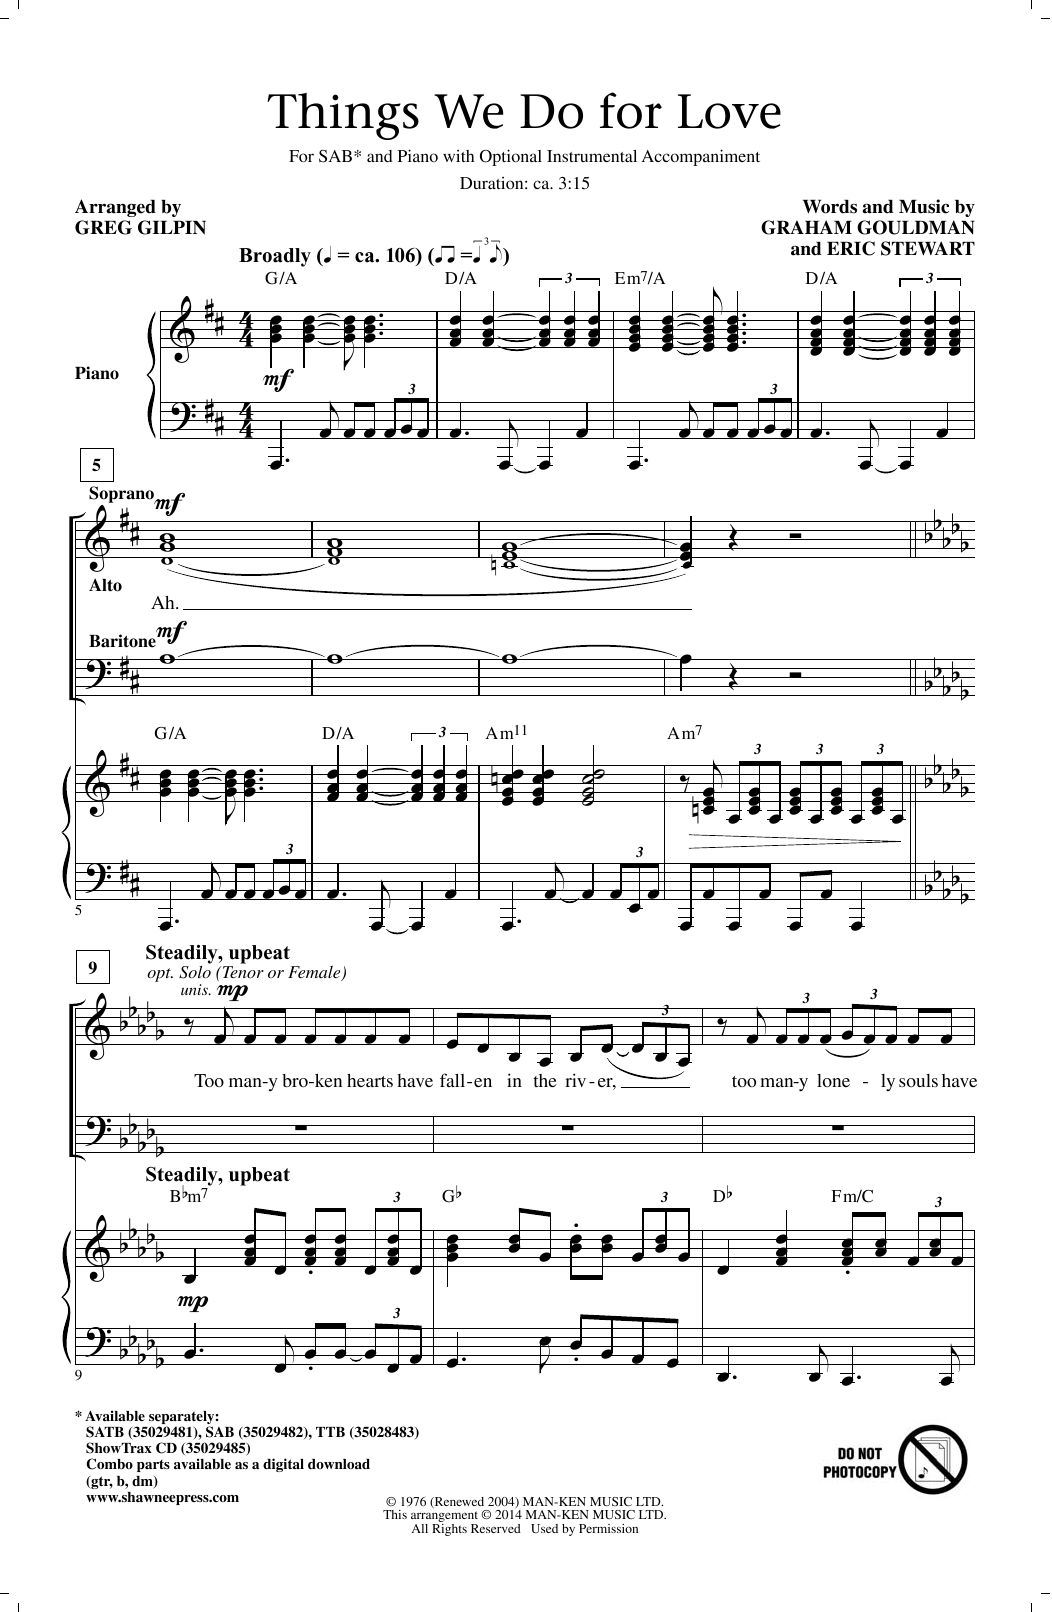 Download 10cc Things We Do For Love (arr. Greg Gilpin Sheet Music